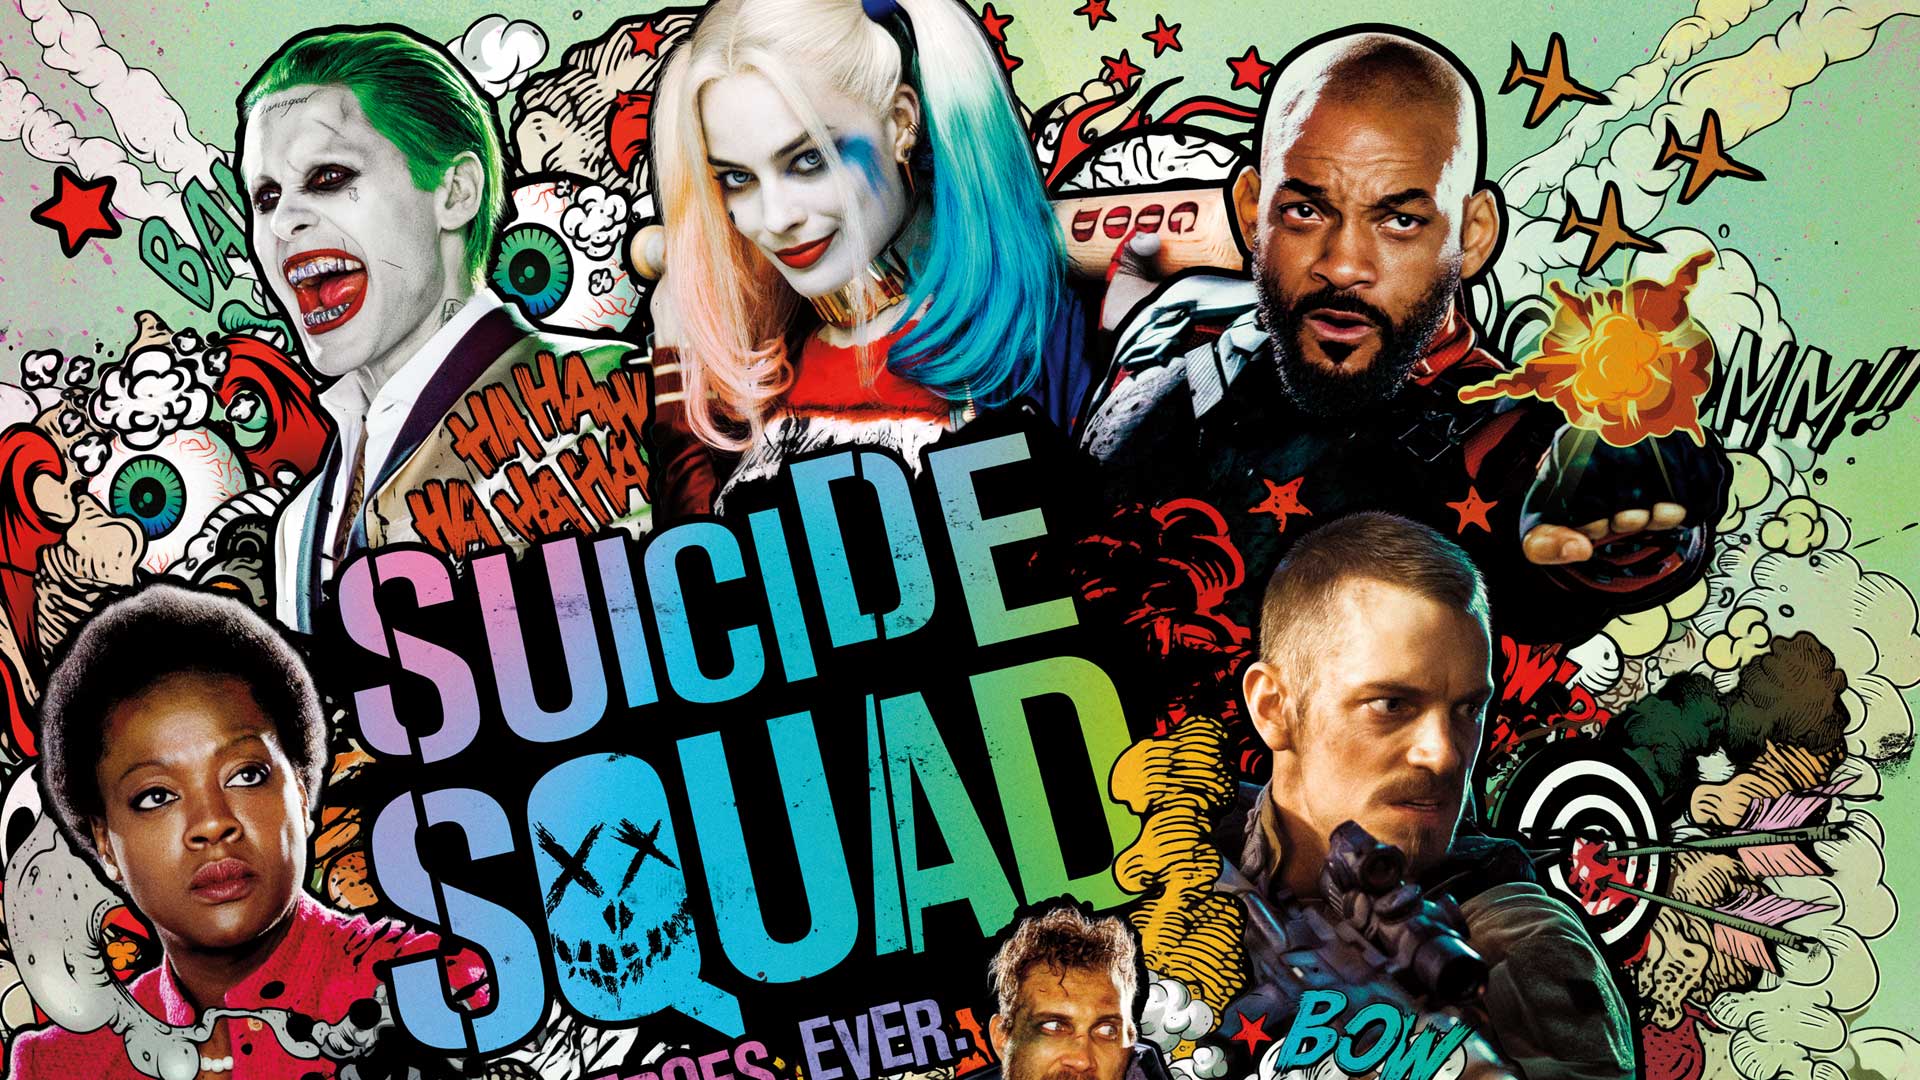 Casting Call for DC Comic's 'The Suicide Squad 2' in Atlanta